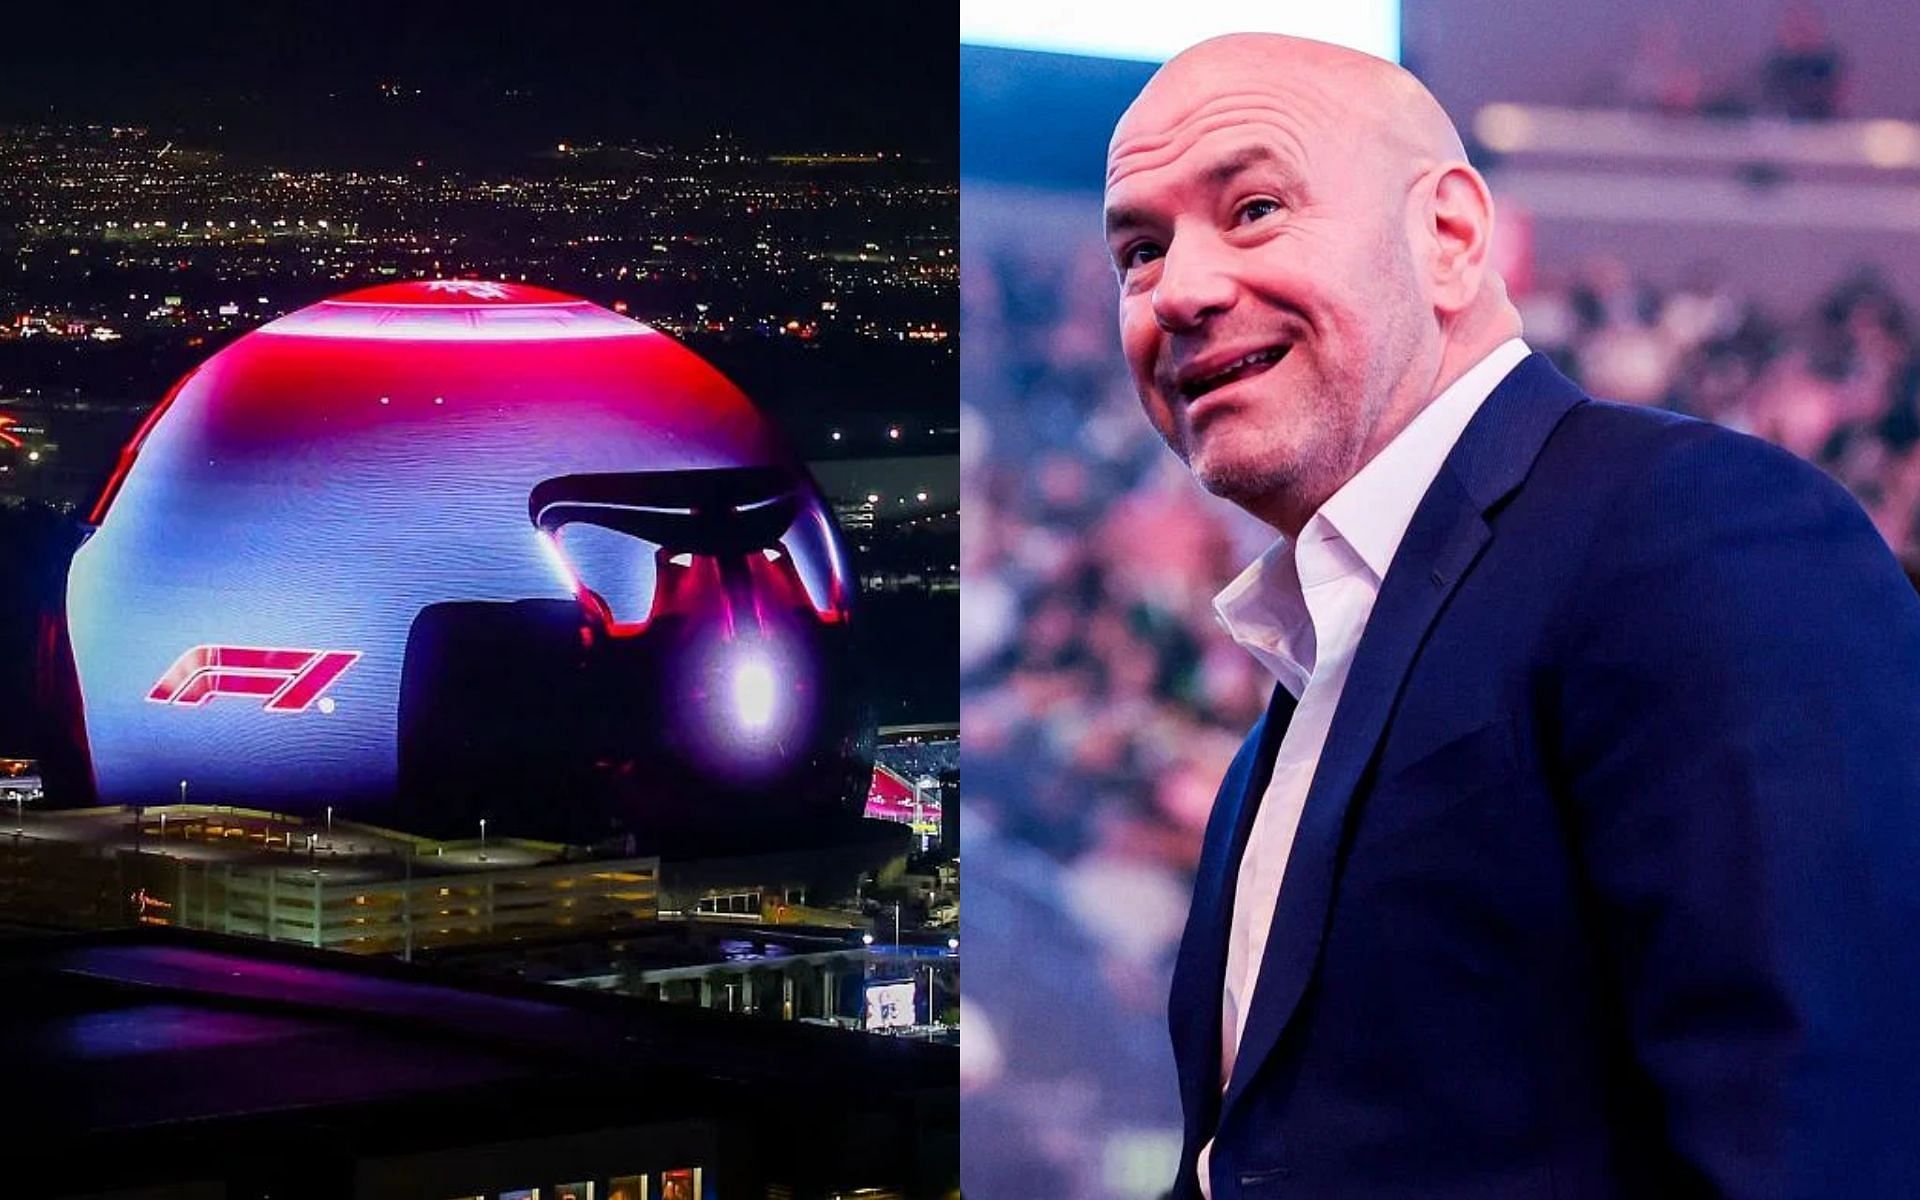 Dana White promises to deliver a once-in-a-lifetime event at The Sphere [Image courtesy: Getty Images]